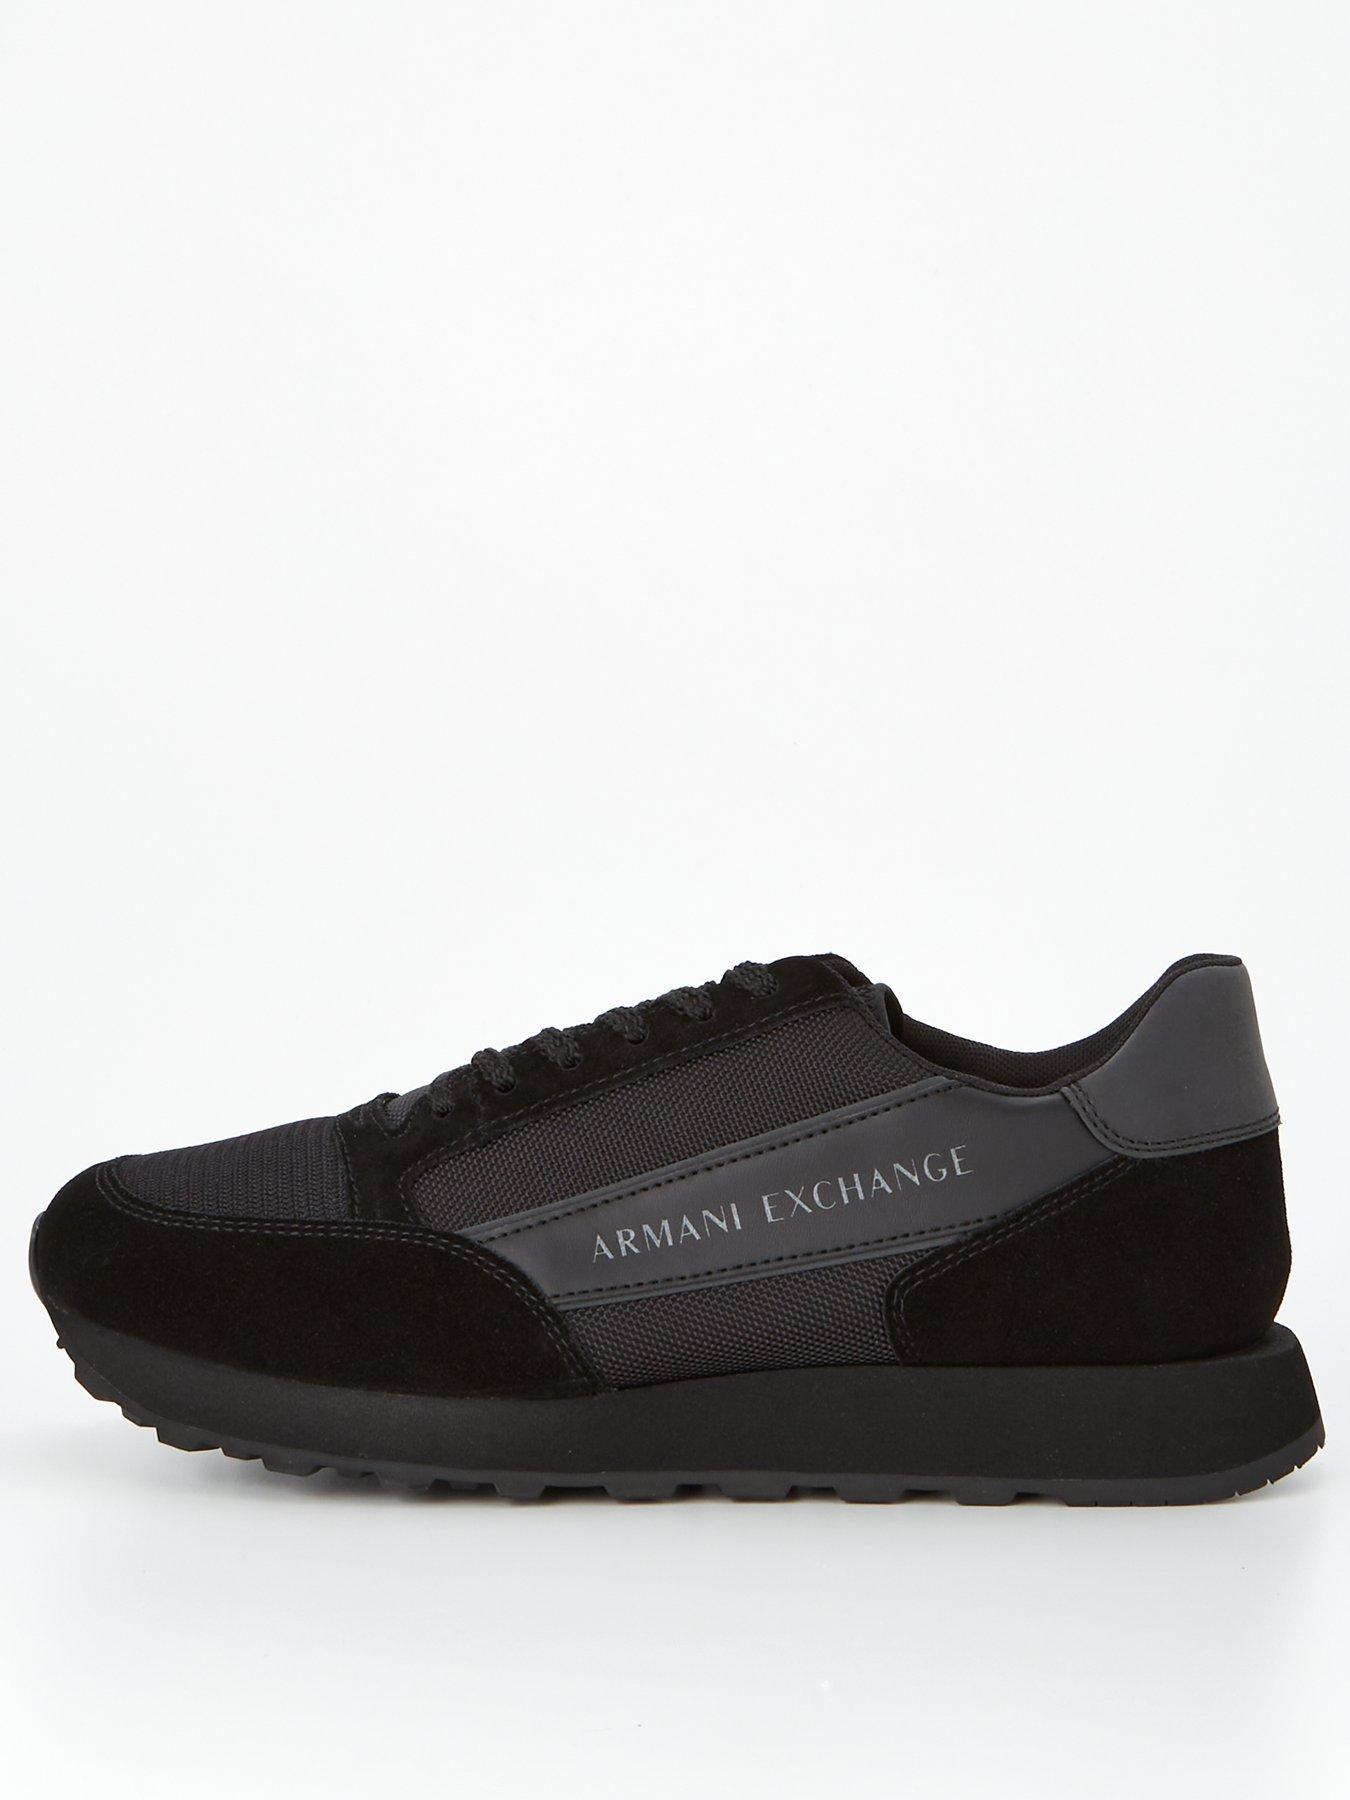 Armani Exchange Suede Mix Trainers - Black | very.co.uk